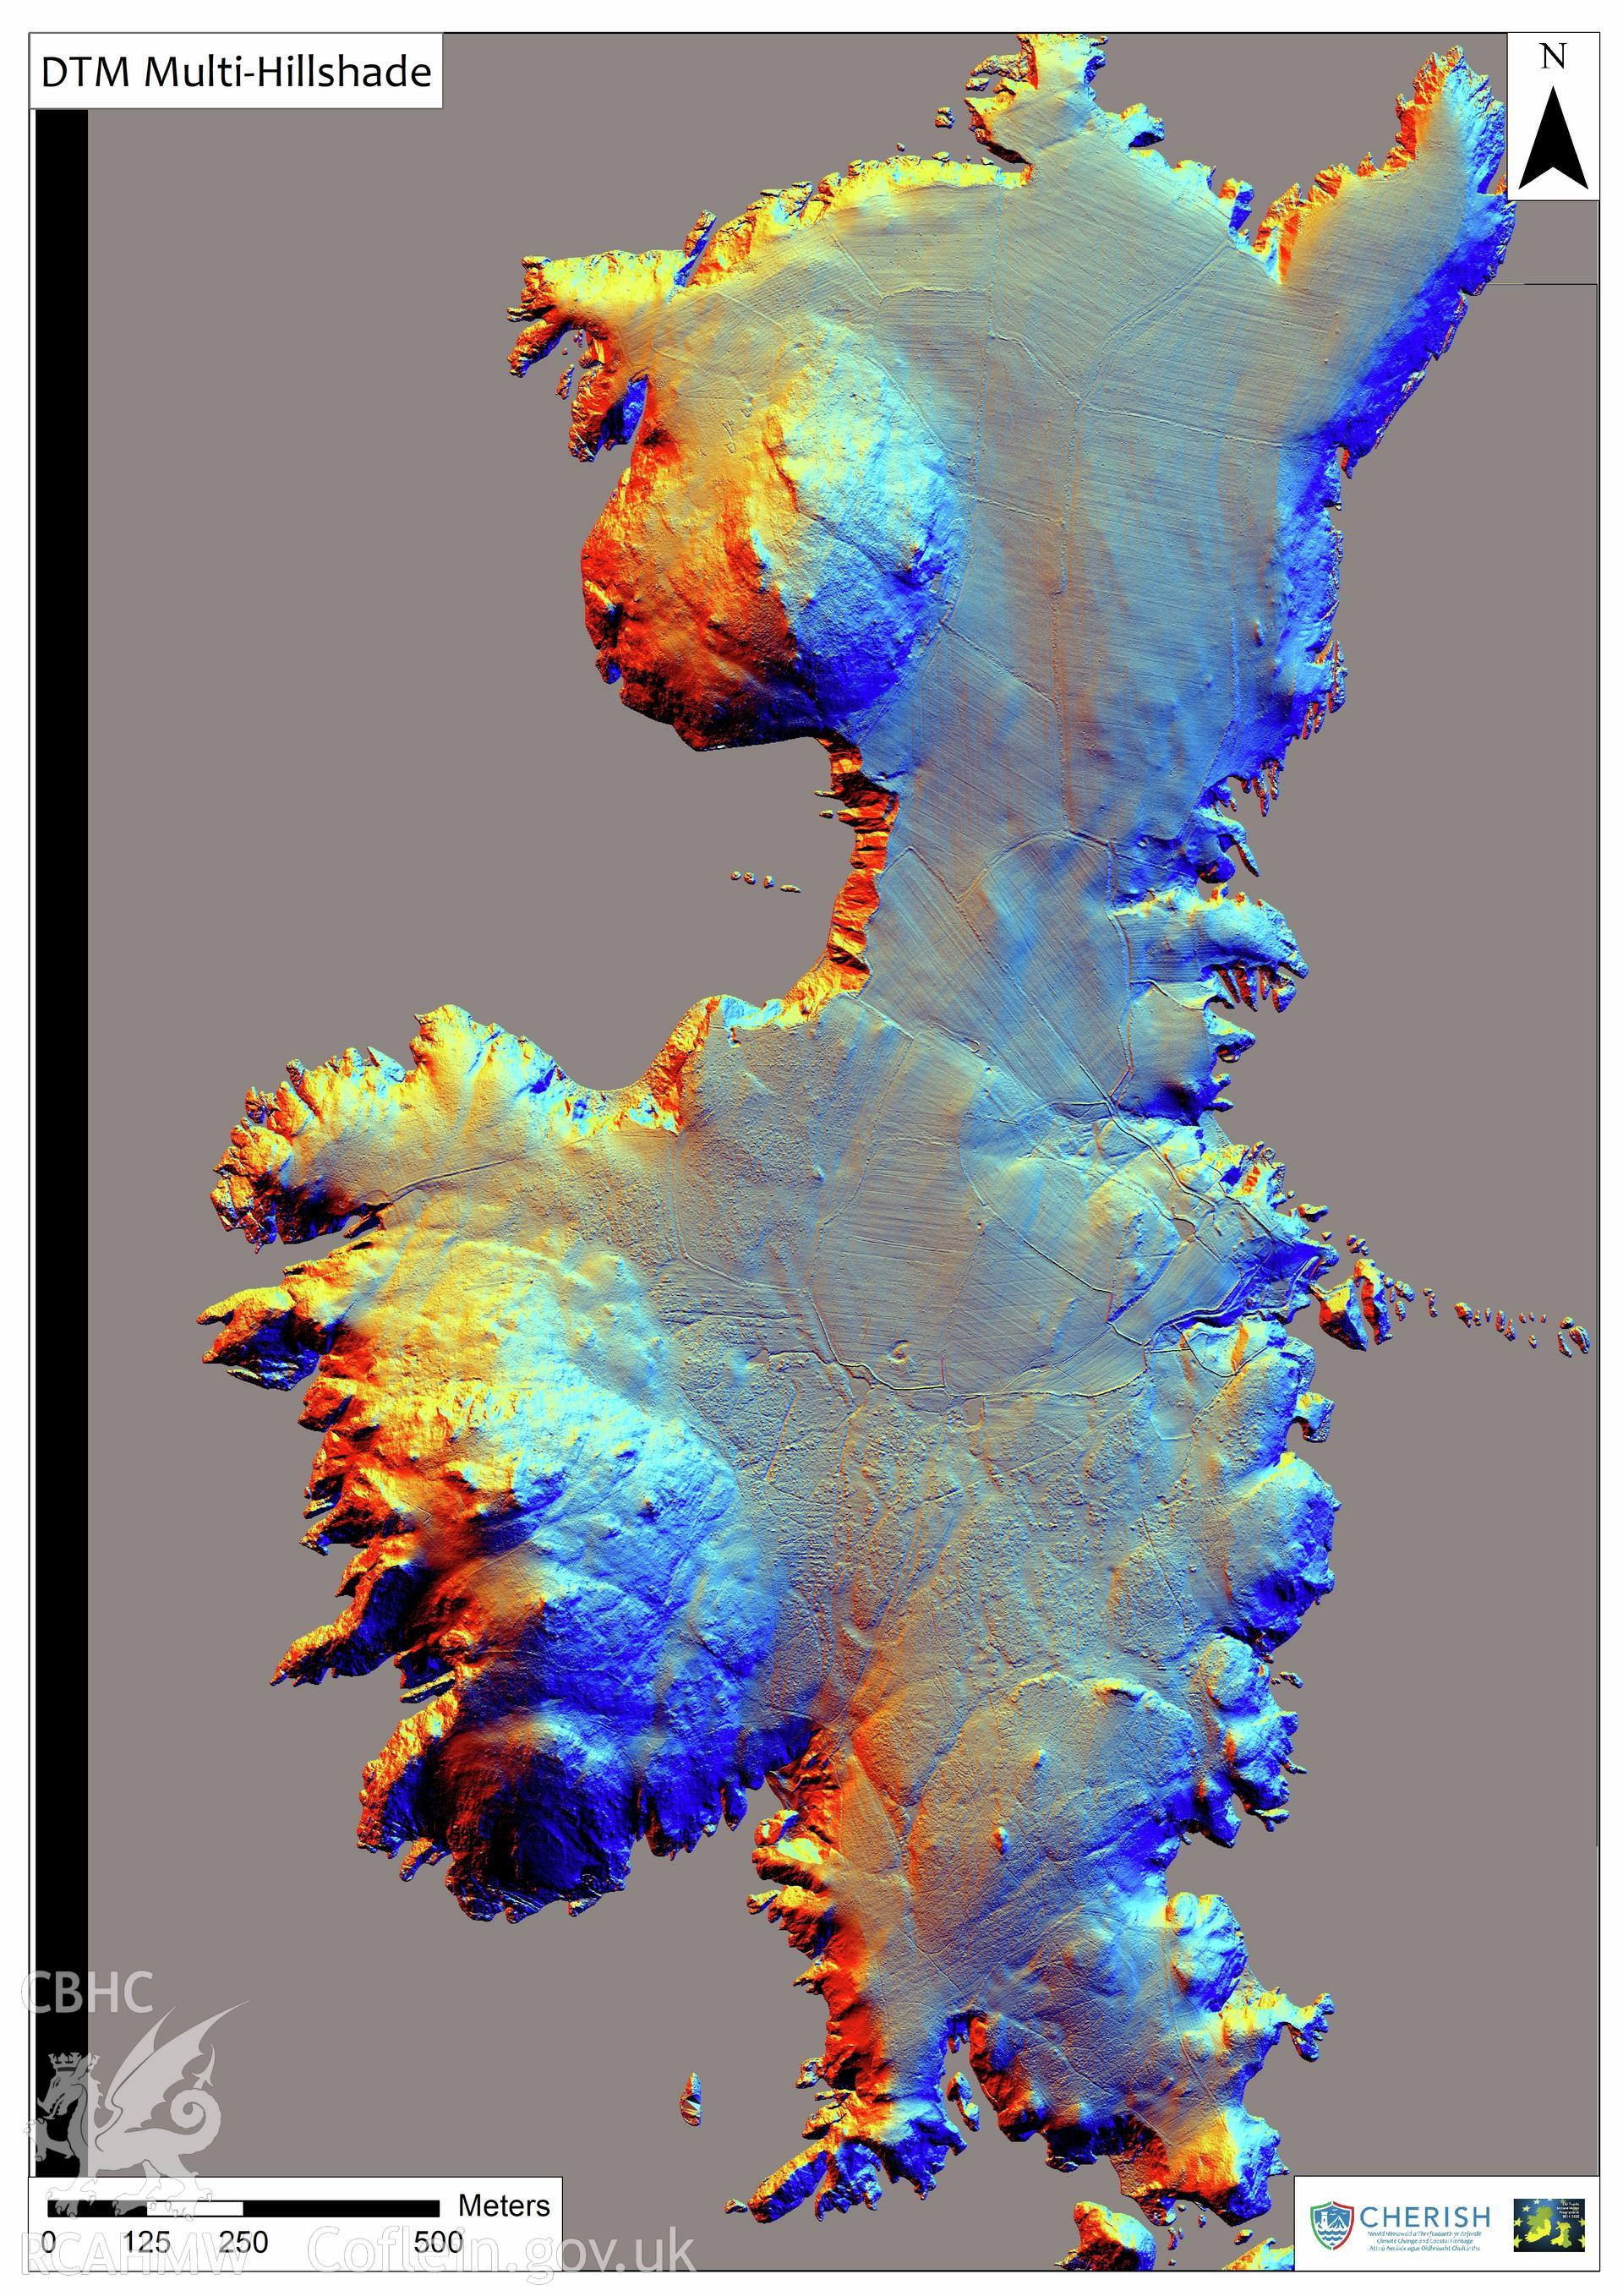 Ramsey Island. Airborne laser scanning (LiDAR) commissioned by the CHERISH Project 2017-2021, flown by Bluesky International LTD at low tide on 24th February 2017. View showing Digital Terrain Model (DTM) of the entire island with multi-hill shading.